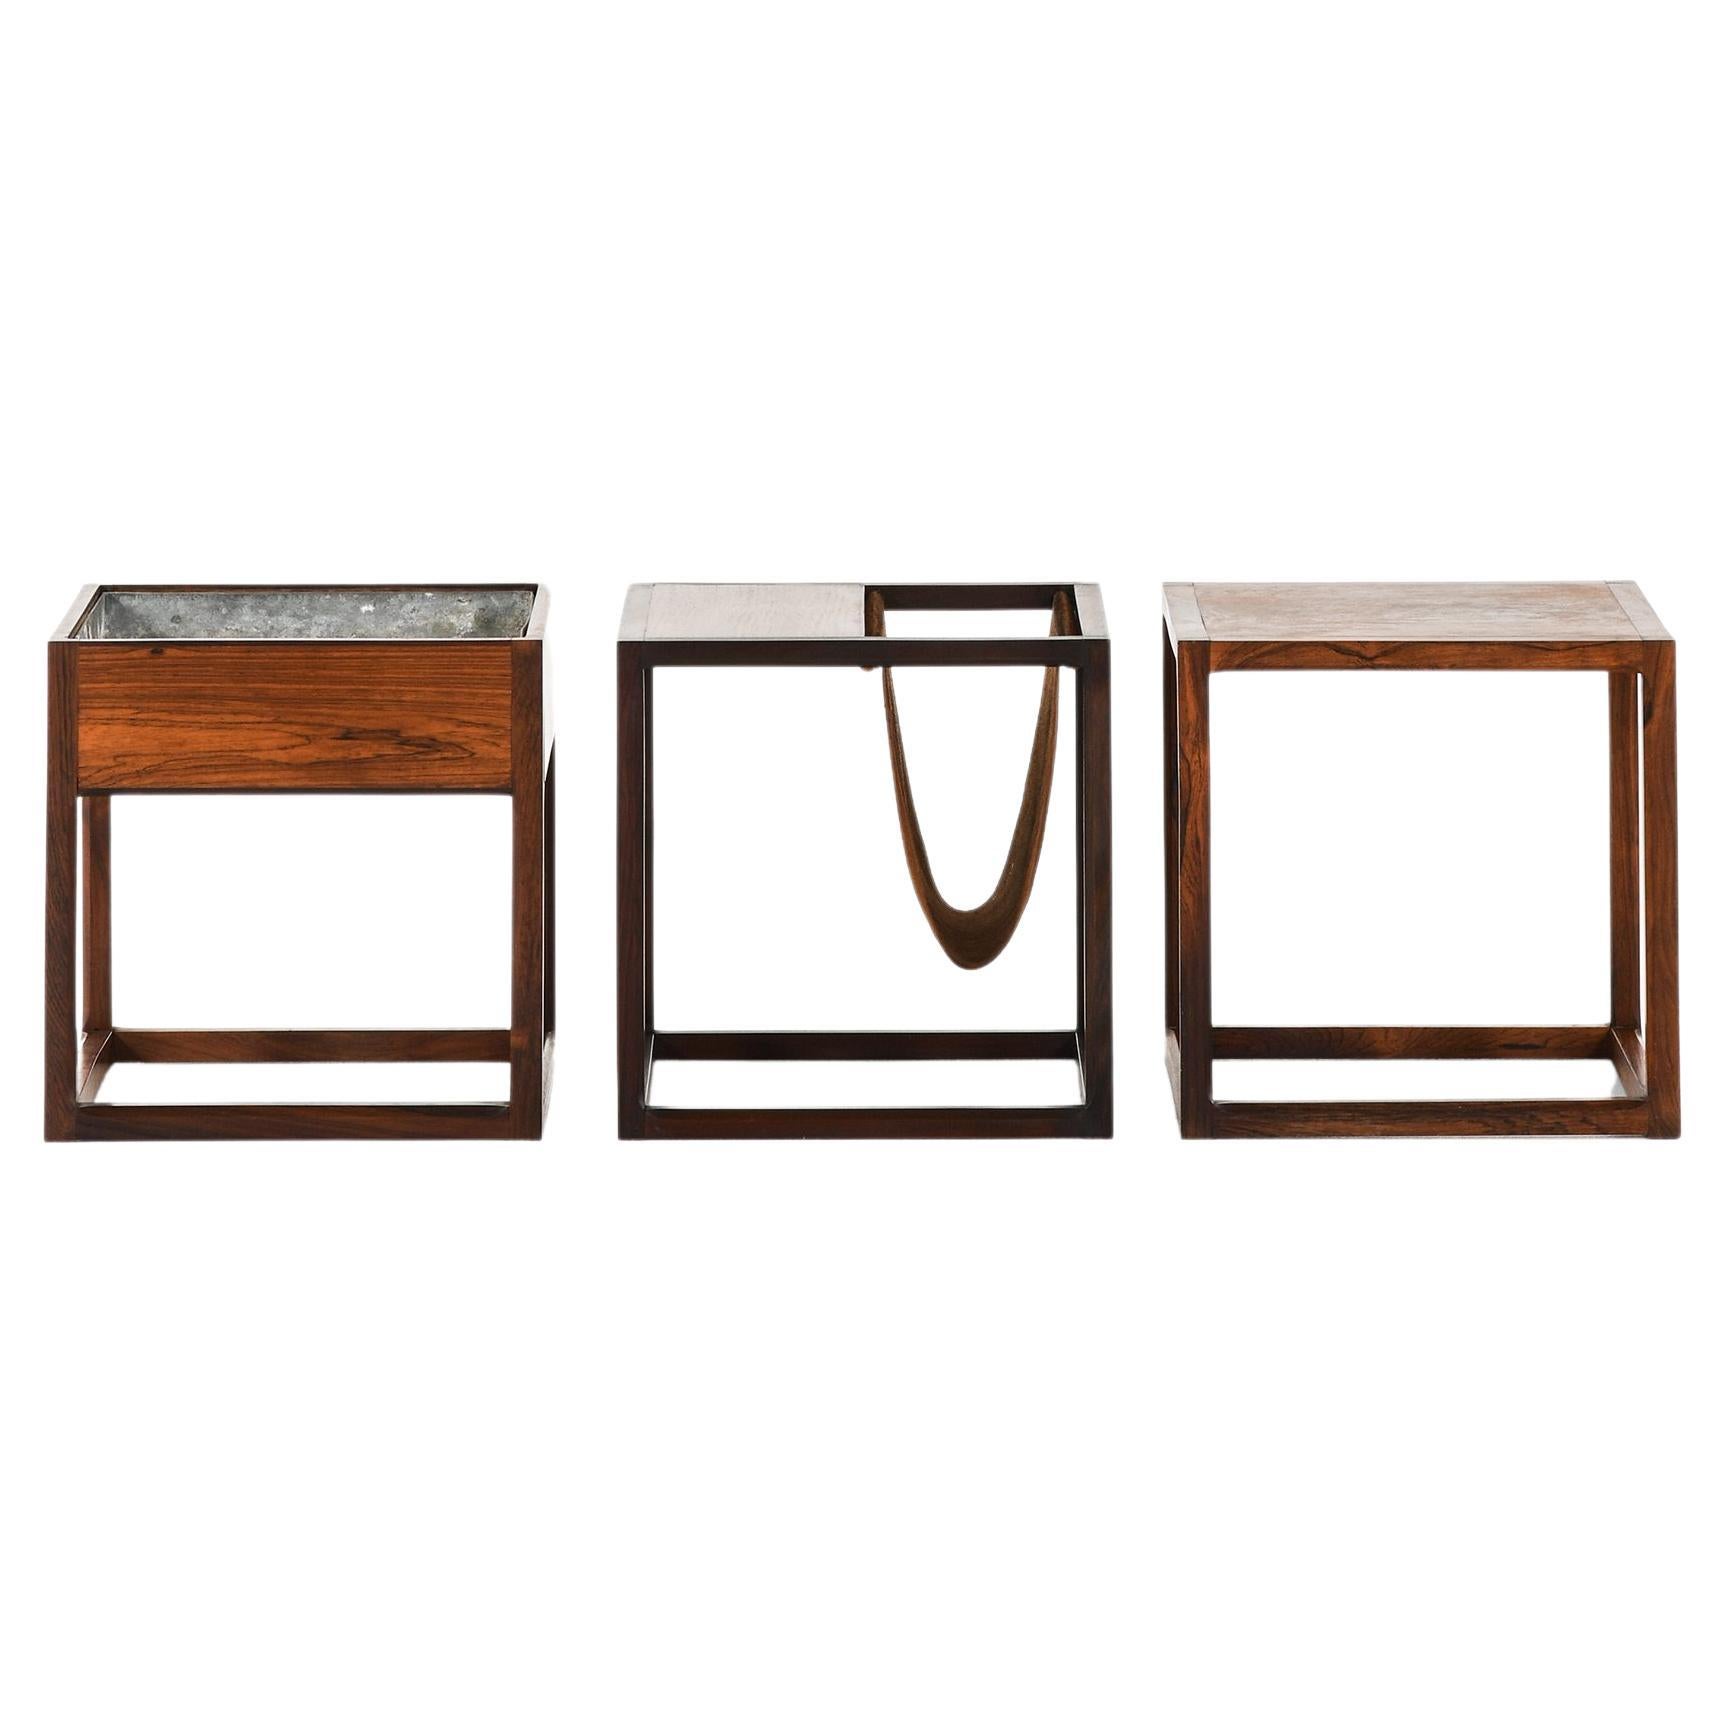 Set of 3 Side Tables in Rosewood, Suede and Zink by Kai Kristiansen, 1960s For Sale